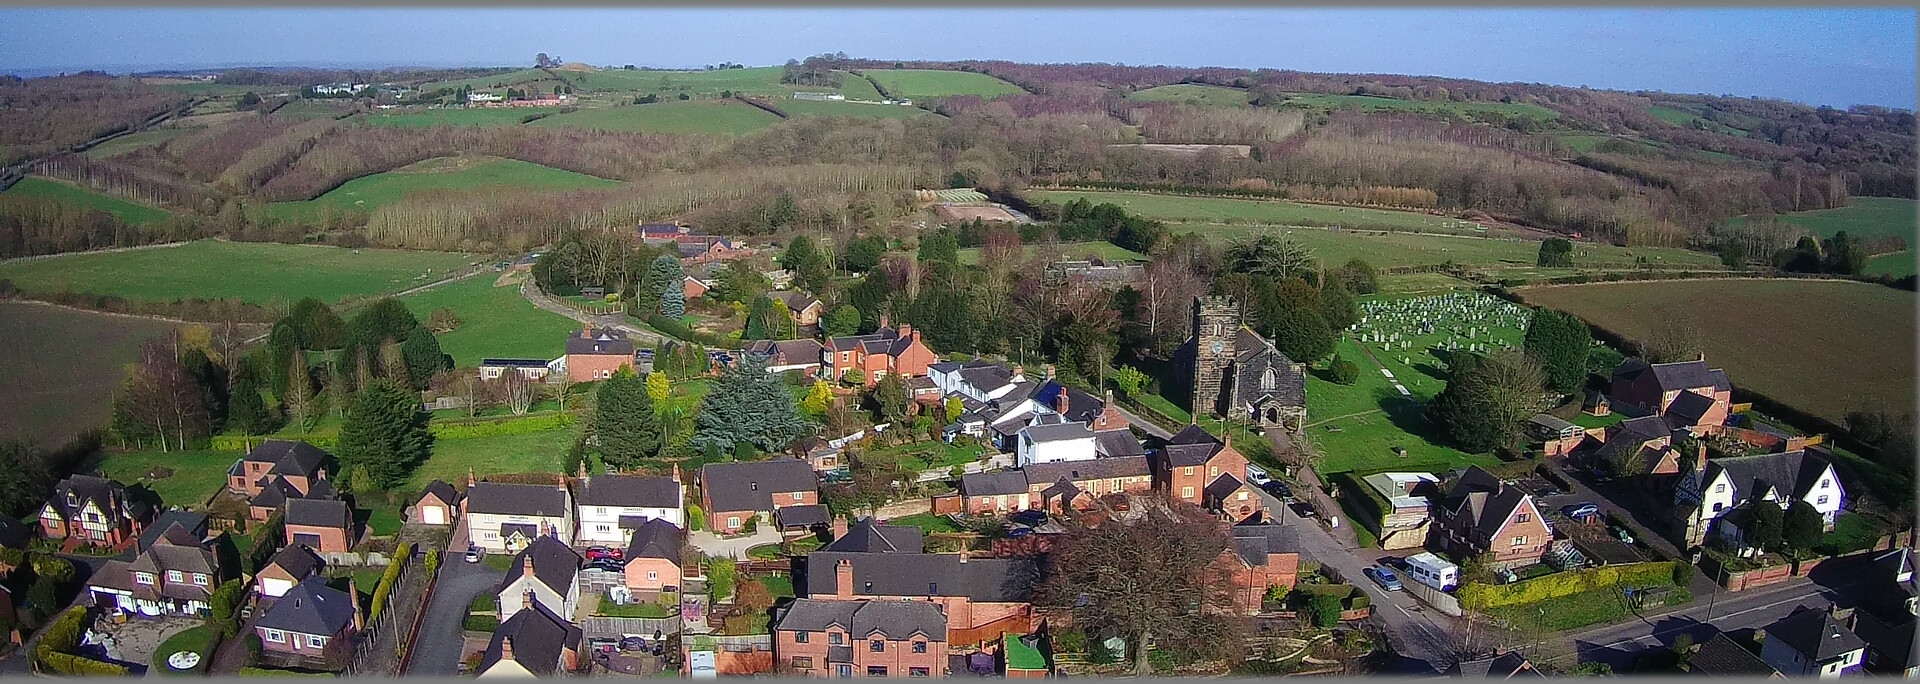 Aerial view of Hartshorne Village from St Peter's Church